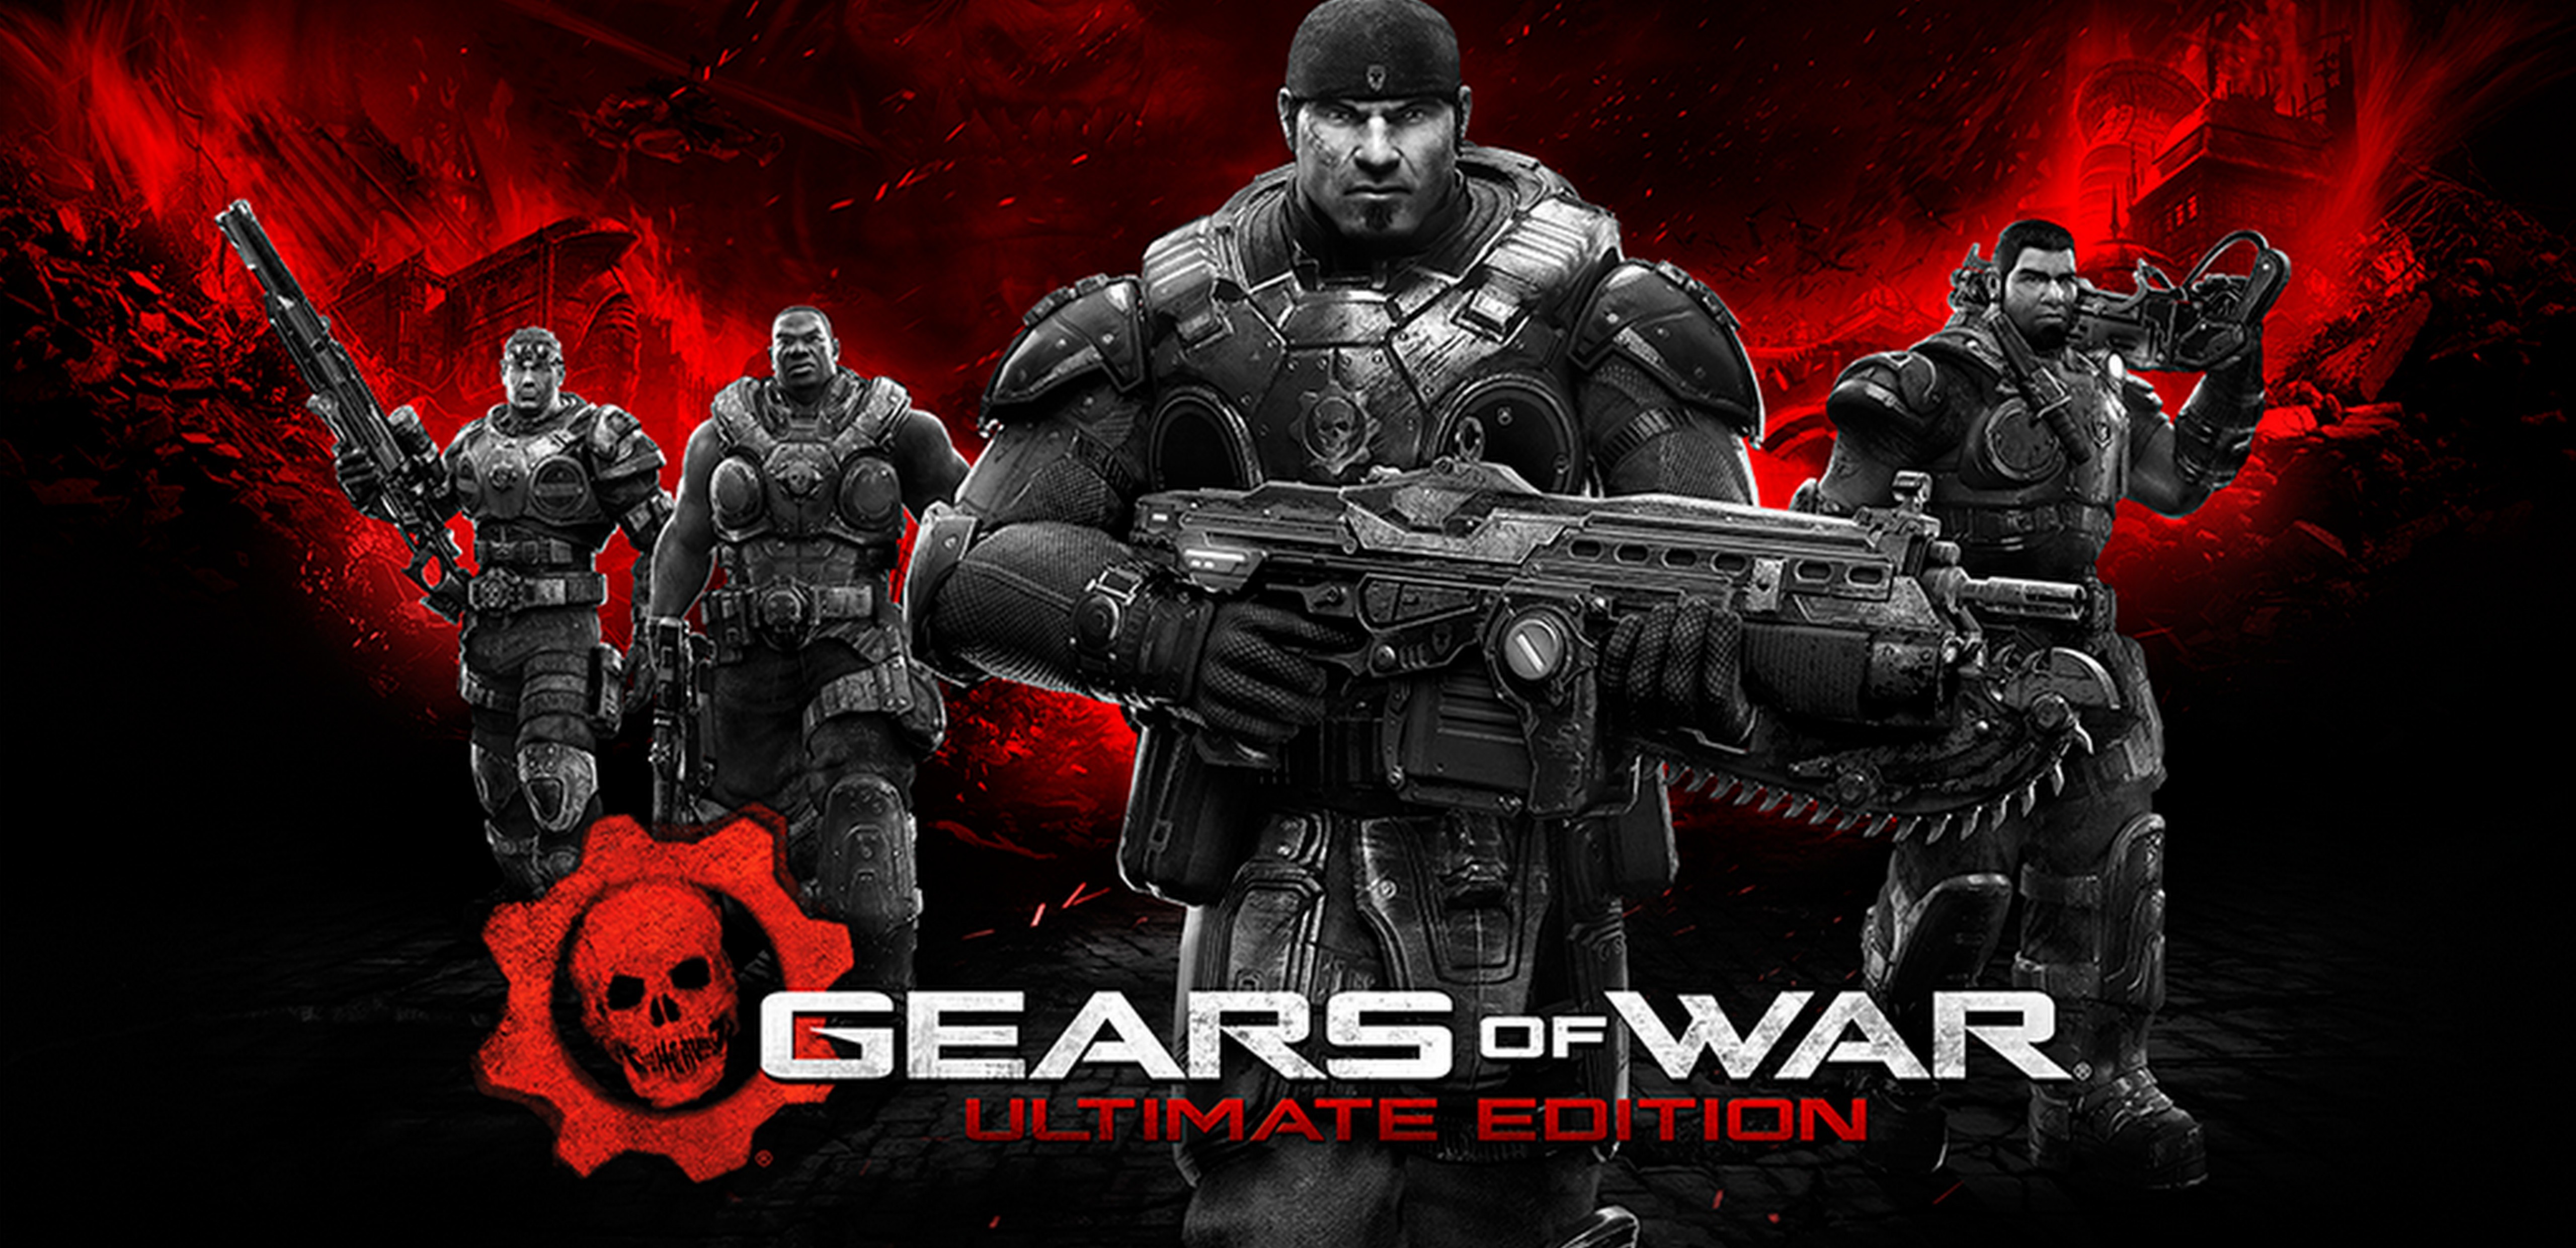 Gears of War: Ultimate Edition for Windows 10 – Available in the Windows Store starting today